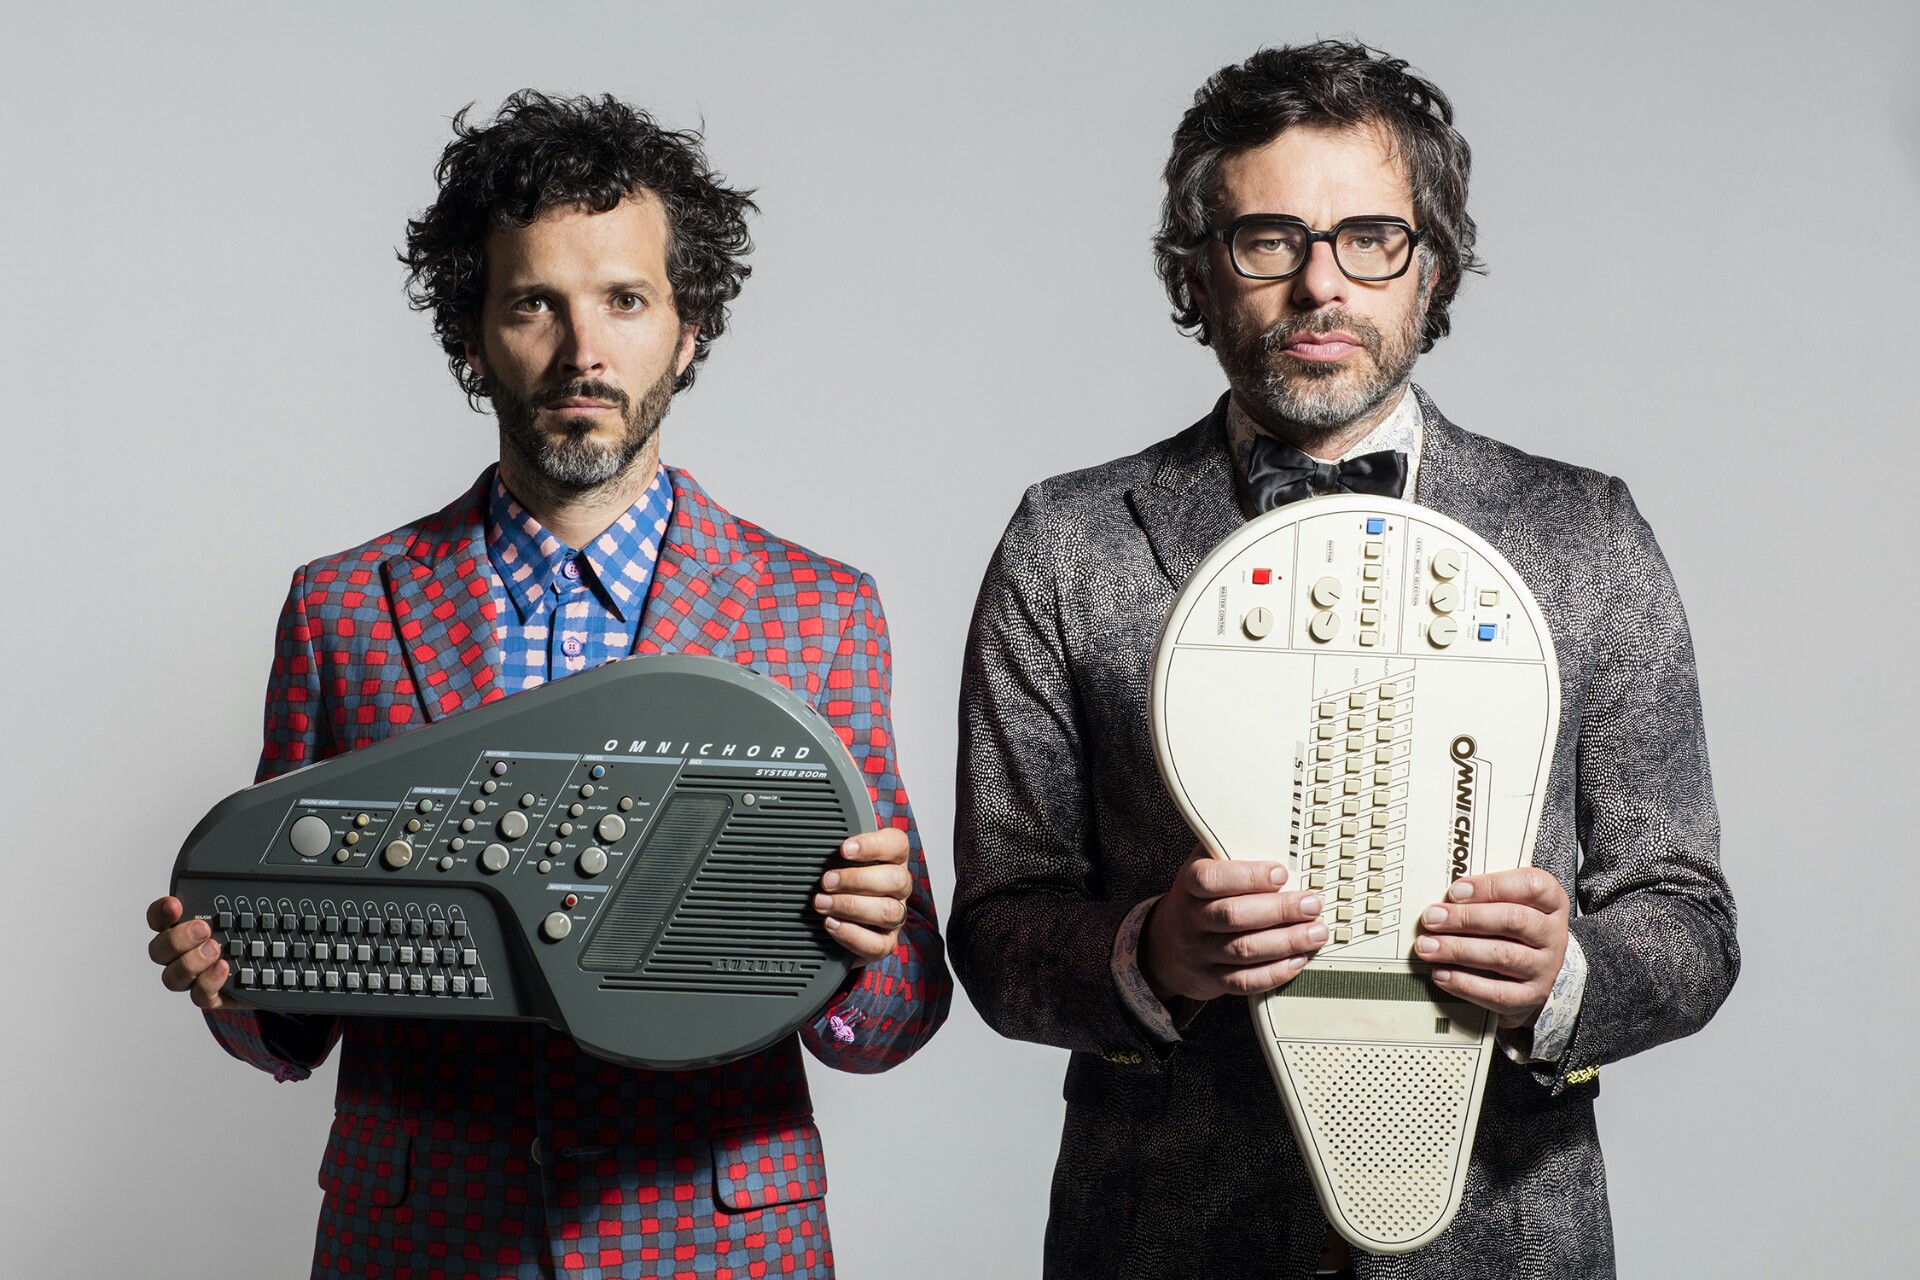 HD Wallpaper Flight Of The Conchords